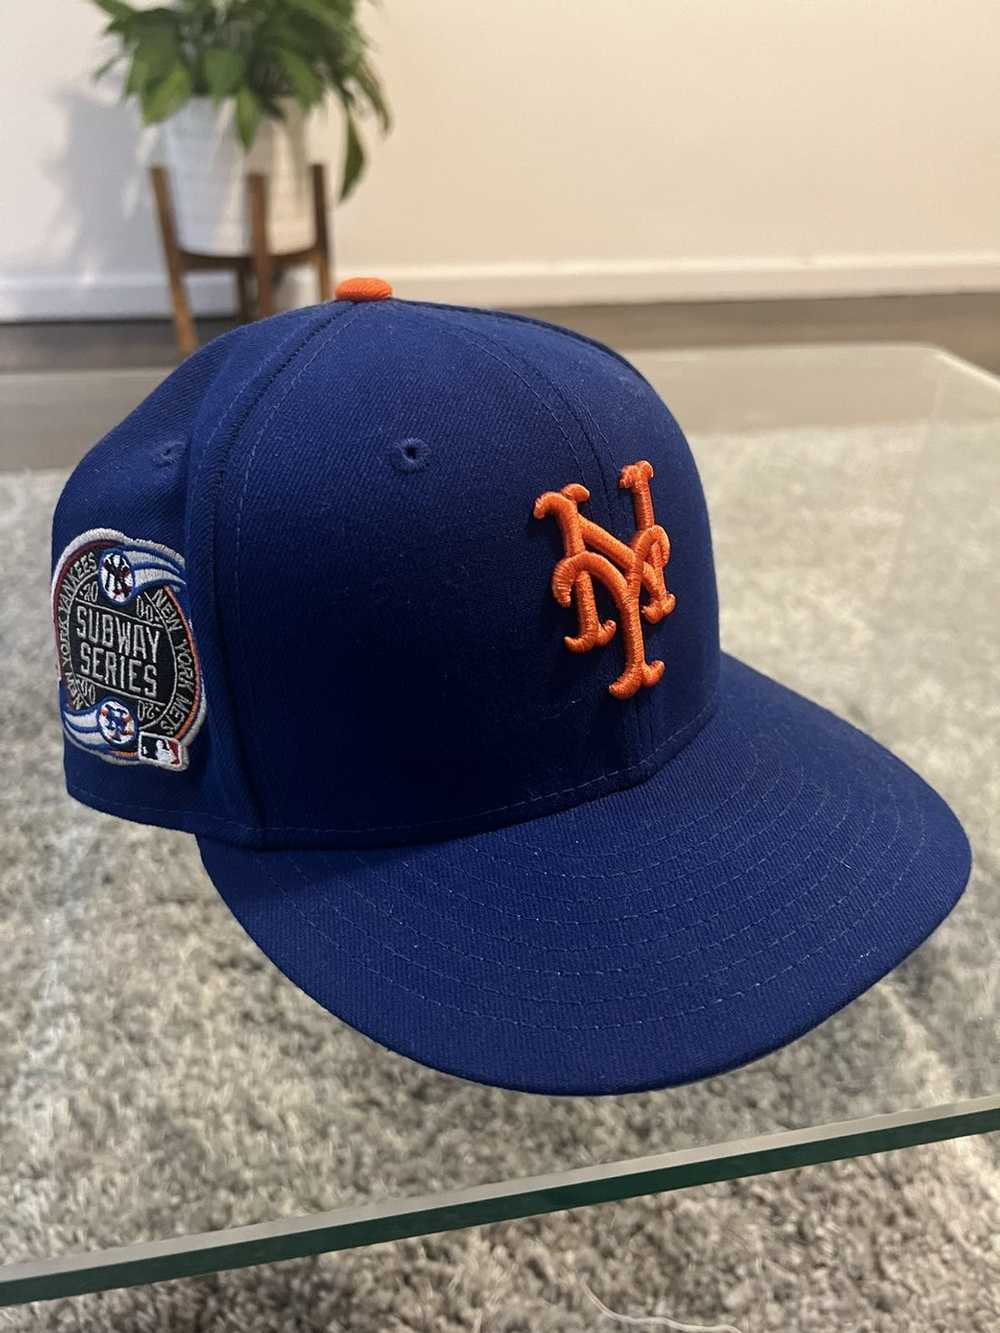 My Black & Blue Mets Fitted & Jersey 🔵⚫ : r/NewYorkMets